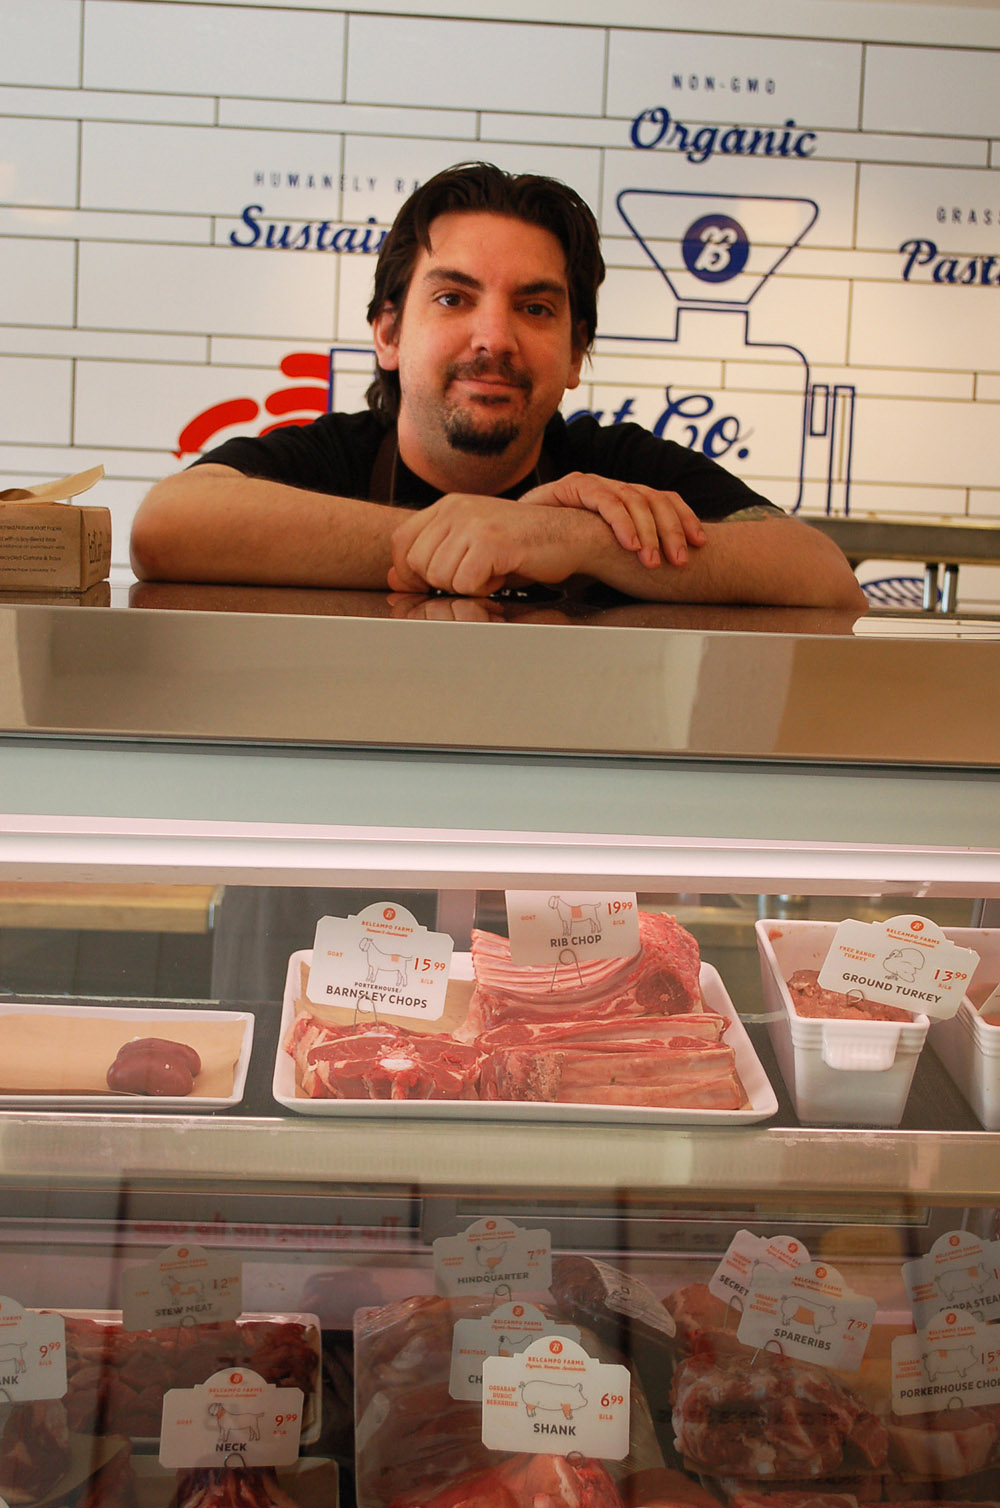 Butcher Matthew Prentice at Belcampo Meat in Palo Alto offers patrons free-range, organic meat from animals that the company raises, slaughters and sells direct. Photo: Susan Hathaway